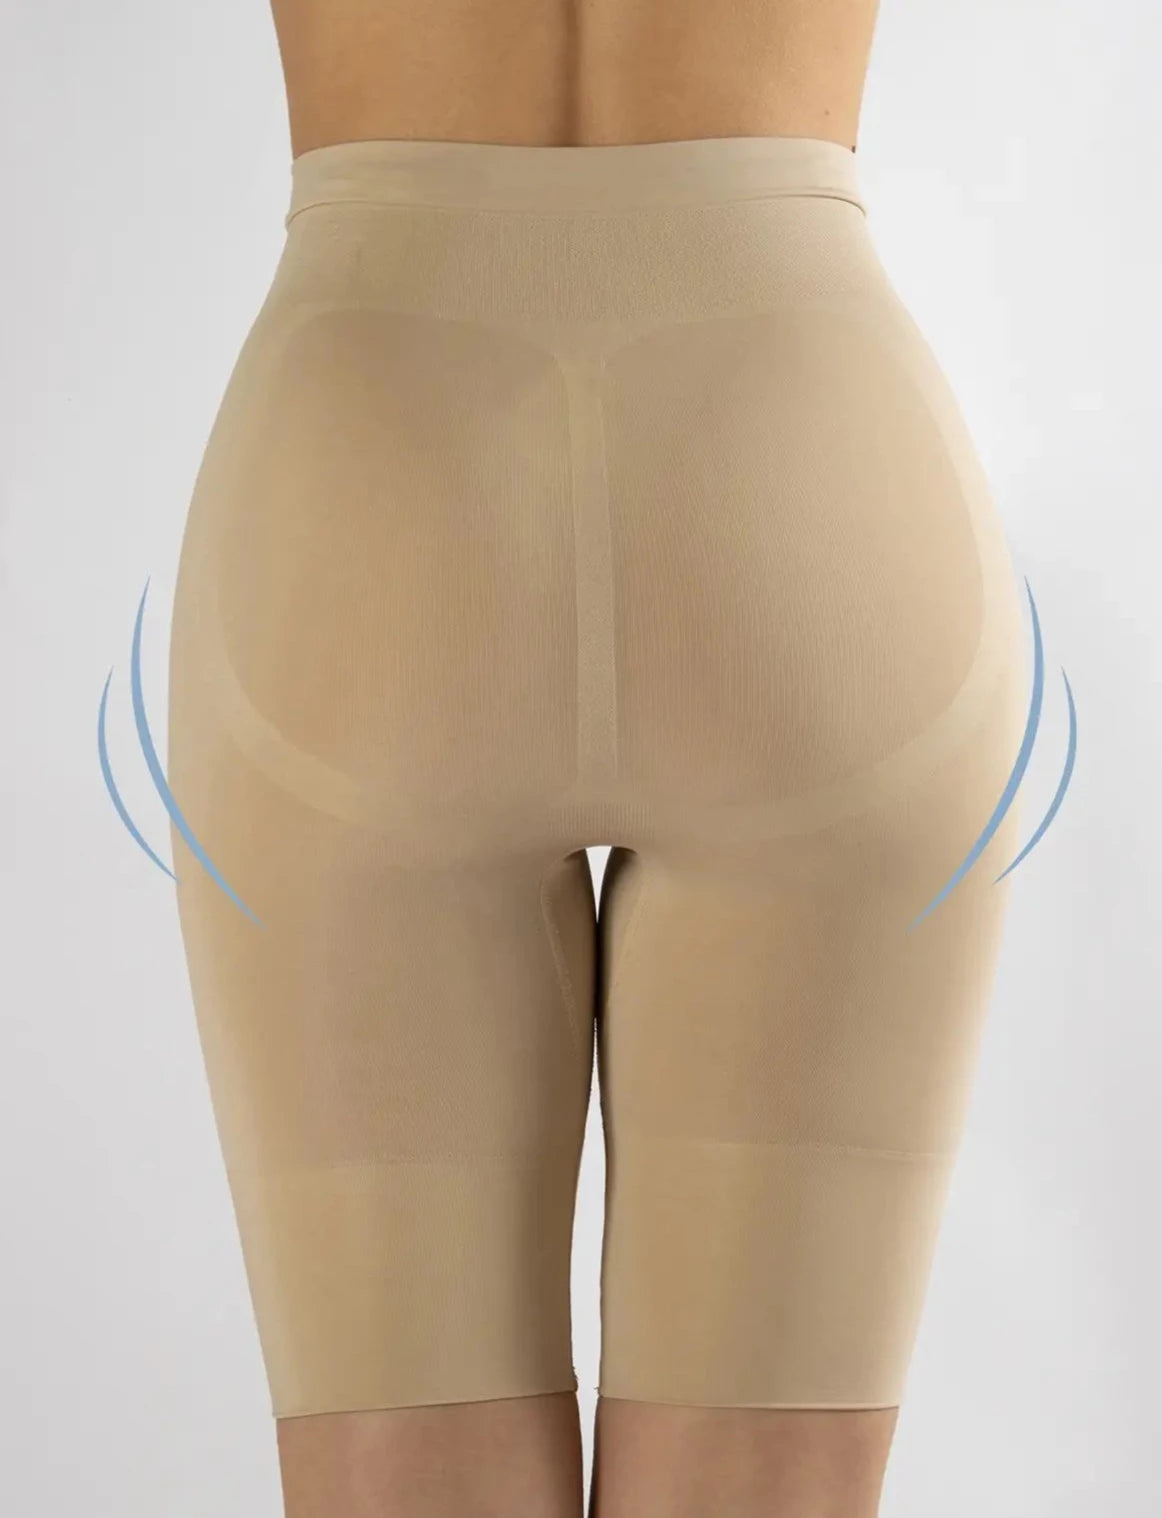 Cette Slimming Shorts - Nude soft and invisible seamless shaping shorts that helps to slim the tummy, shape the hips and pushes up the bum.